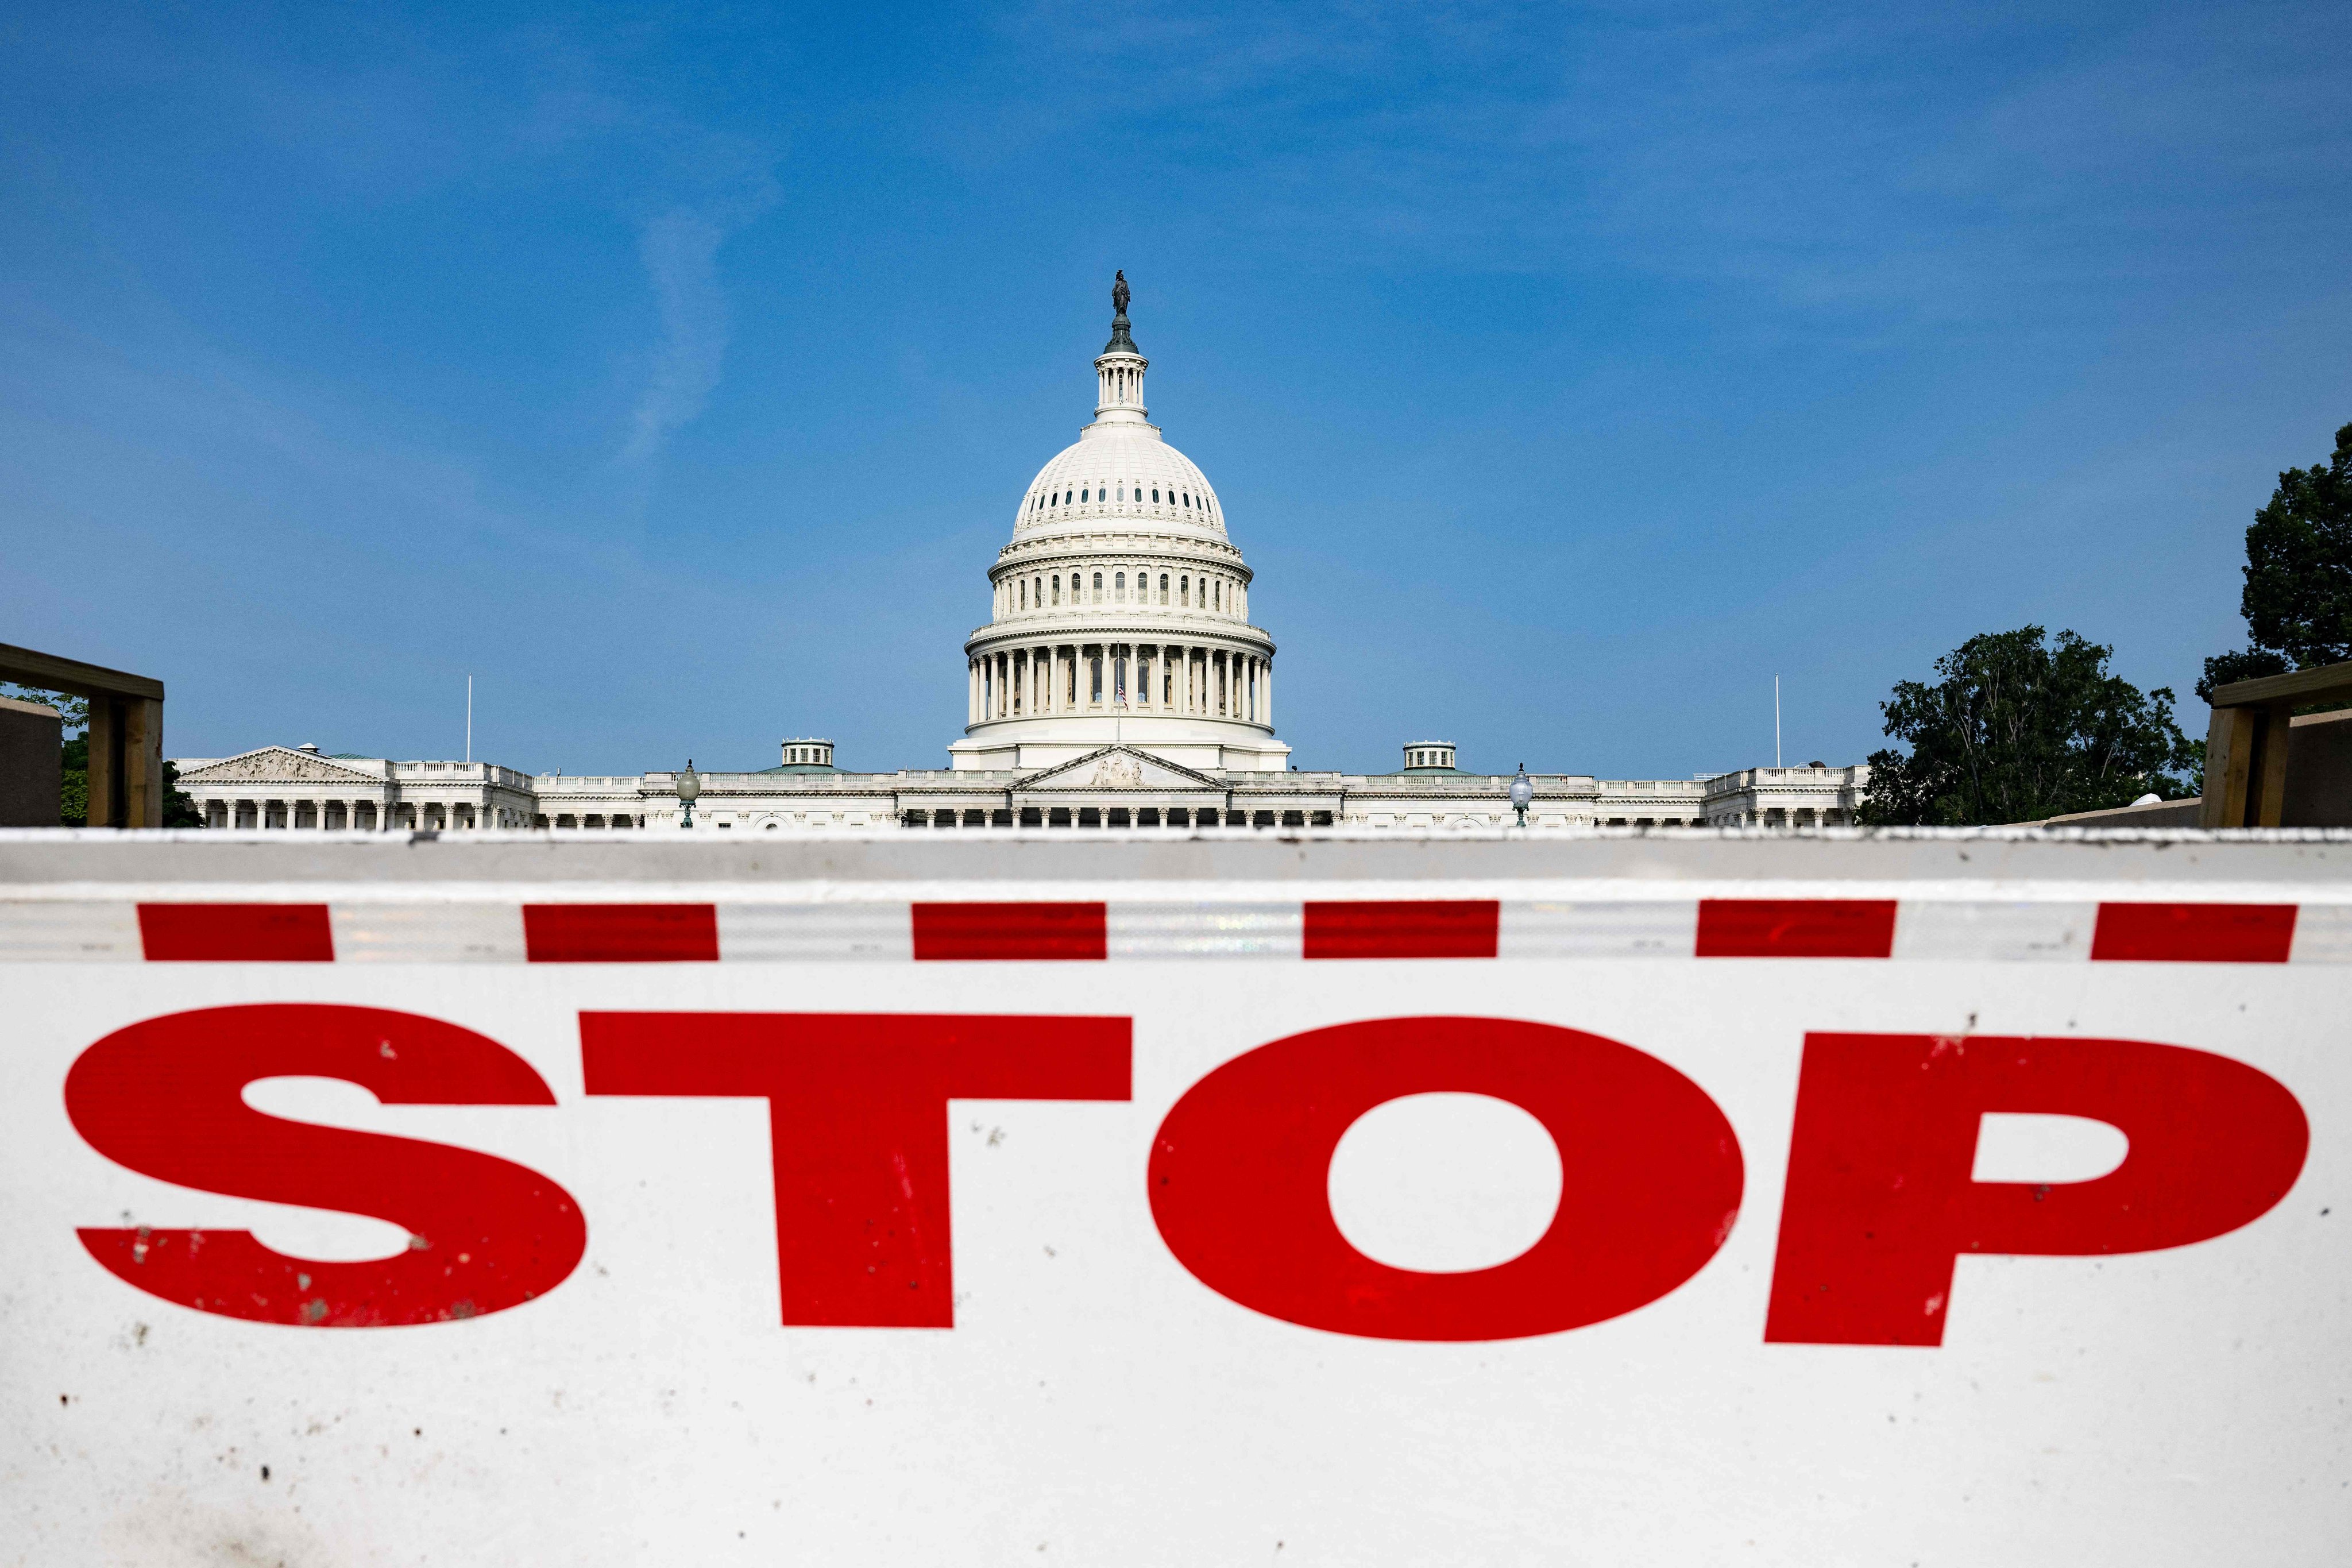 A barrier to stop vehicles stands in front of the US Capitol in Washington on May 11. Unless the US Congress votes to raise or suspend the debt ceiling, the country risks defaulting on its US$31.4 trillion debt. Photo: AFP